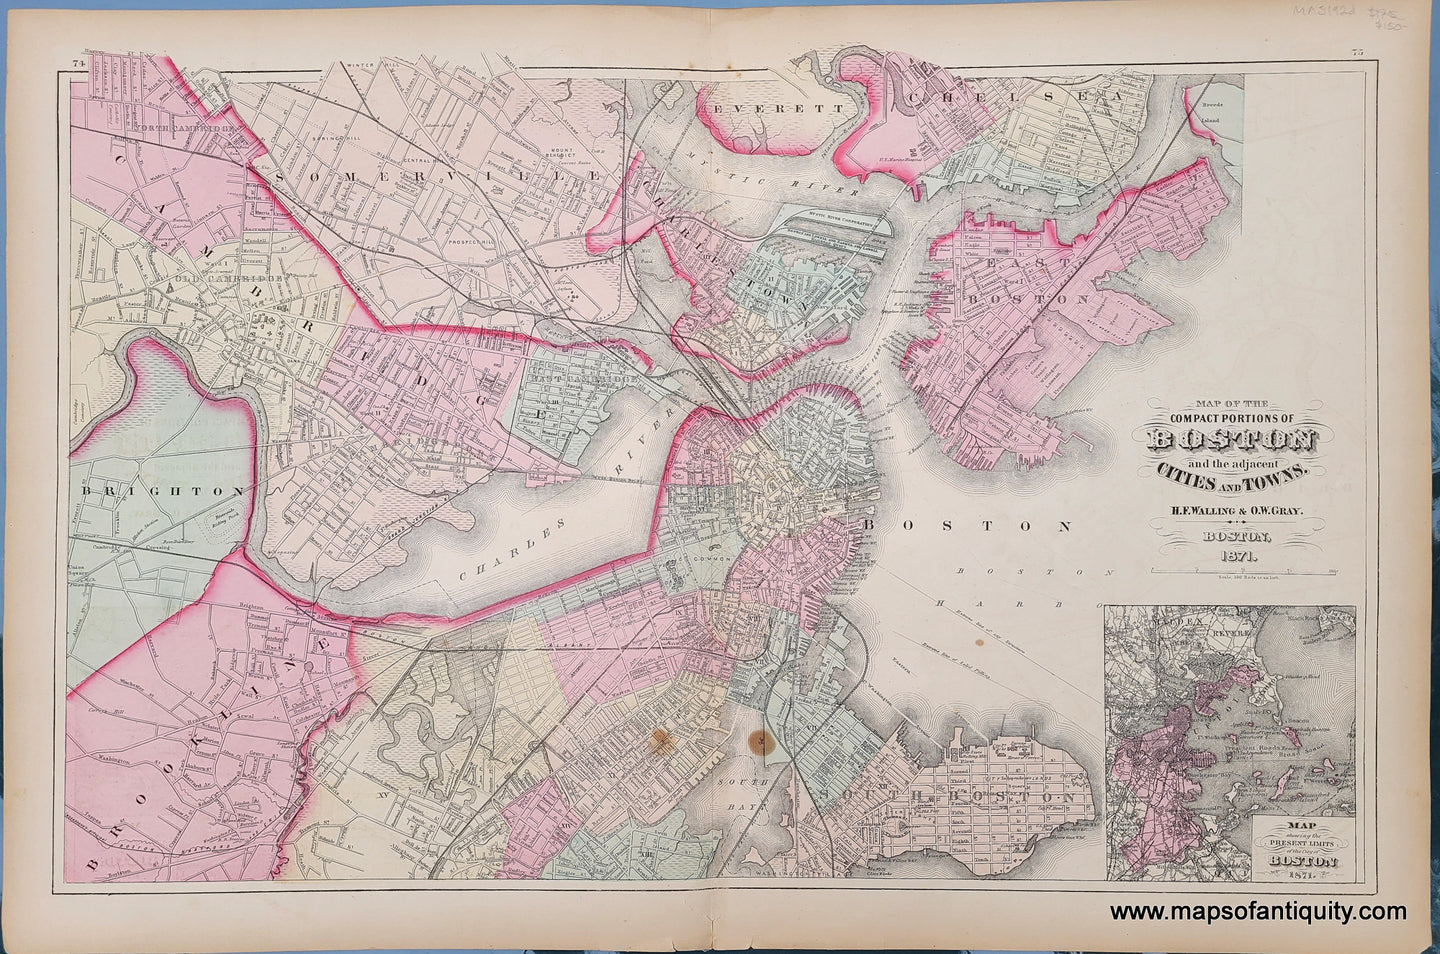 Antique-Map-Boston-and-the-adjacent-Somerville-Charlestown-Cambridge-Brookline-South-Boston-East-Boston--Back-Bay-FensCities-and-Towns-Massachusetts-Maps-of-Antiquity-Massachusetts-Maps-of-Antiquity